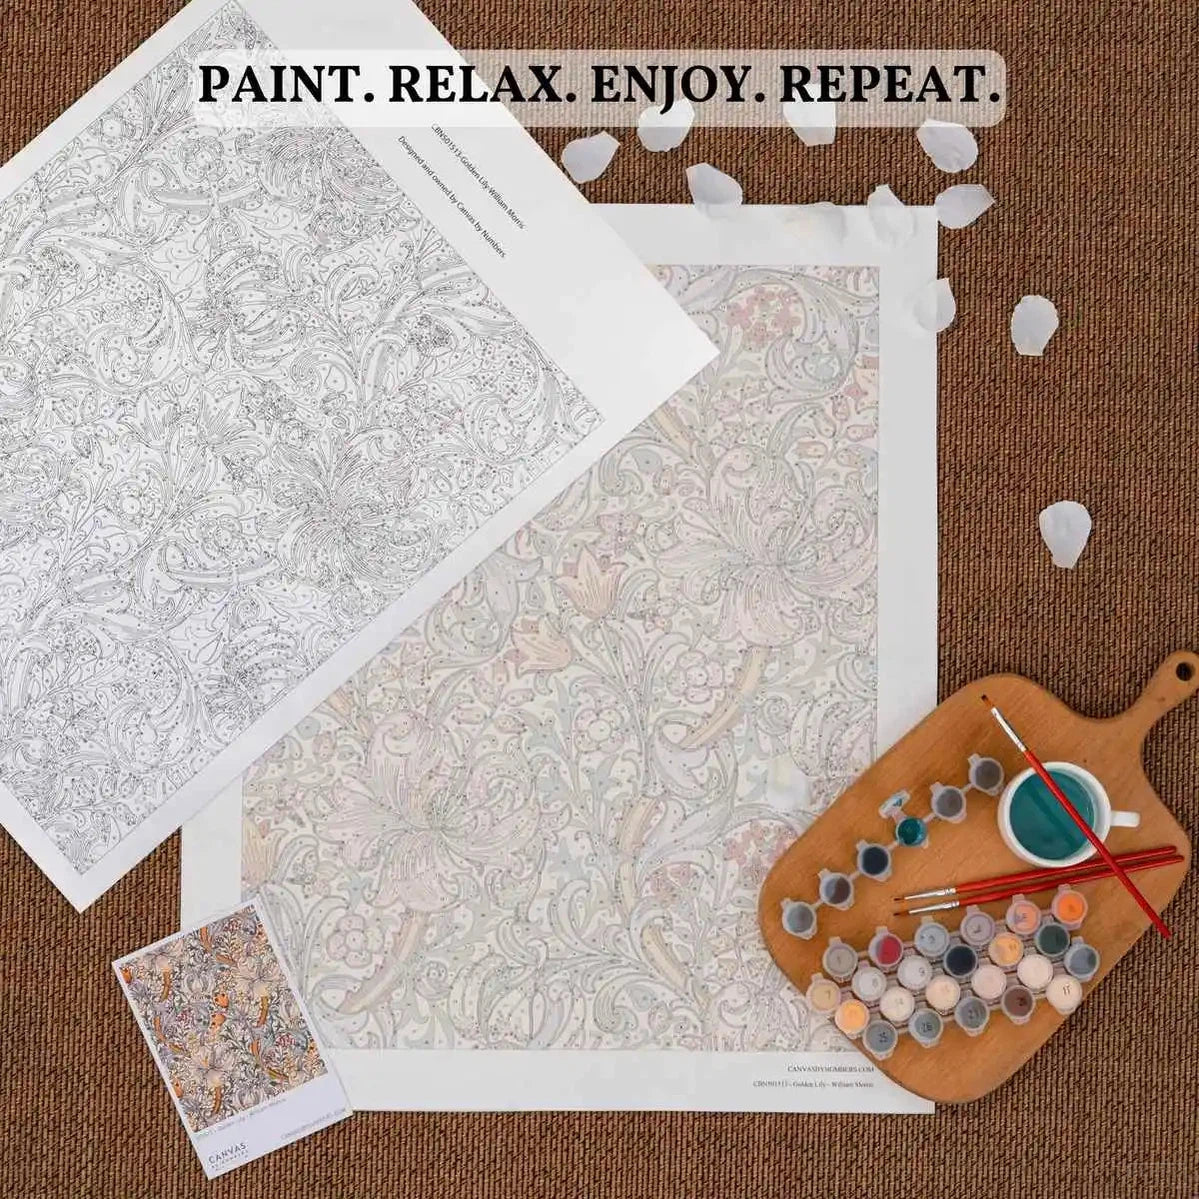 Heritage Eagle by James Meger - Paint by Numbers Kit for Adults